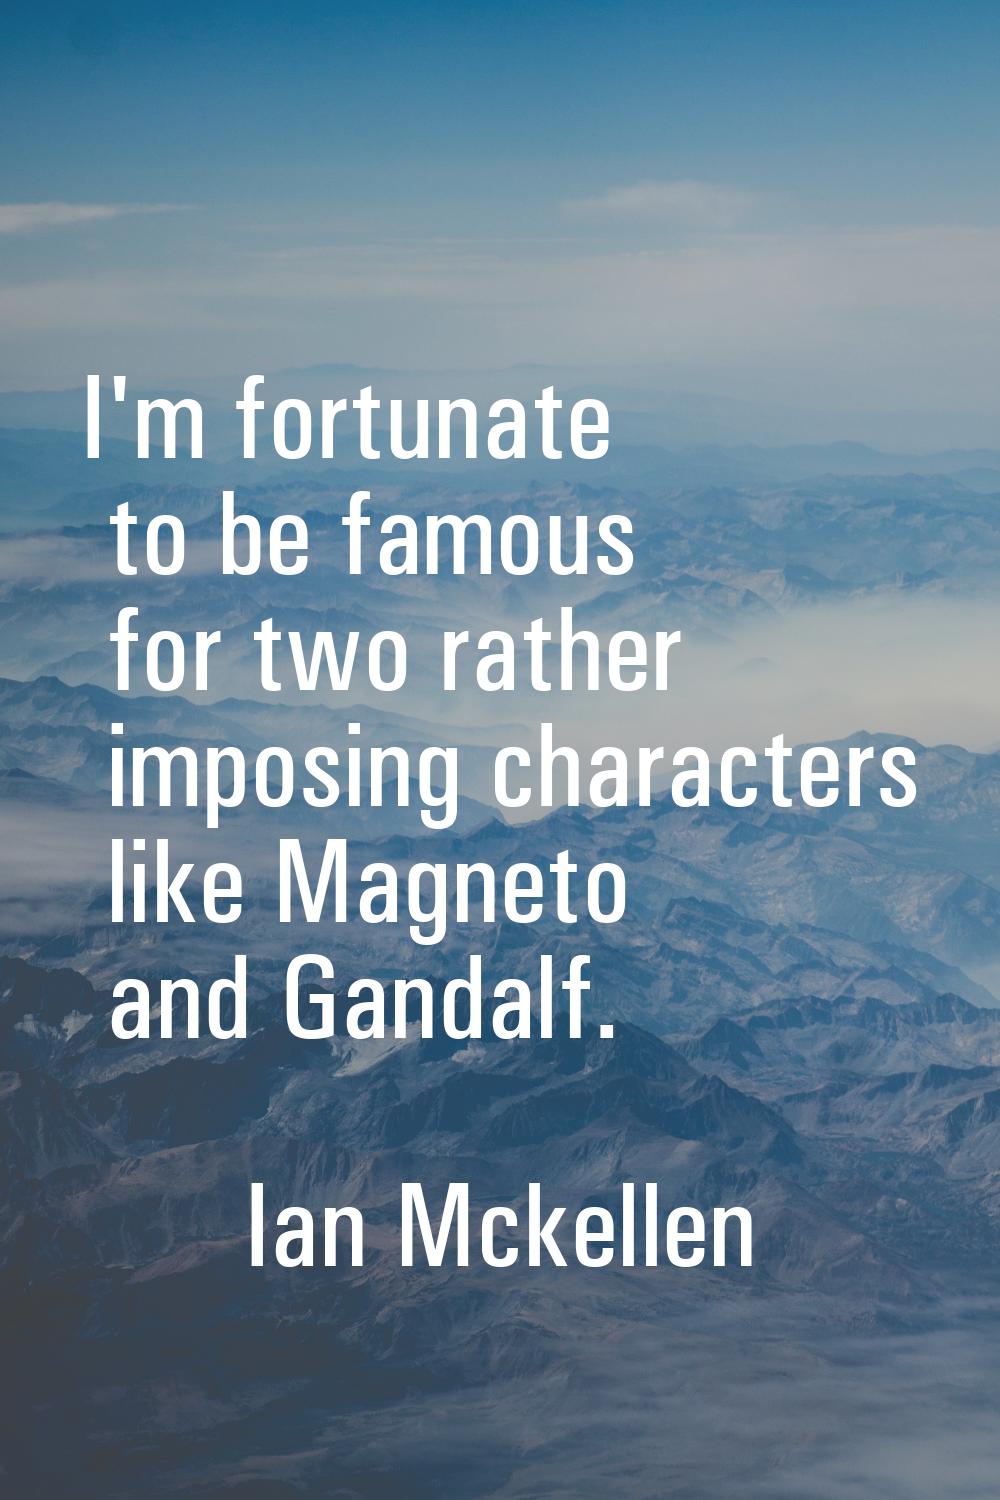 I'm fortunate to be famous for two rather imposing characters like Magneto and Gandalf.